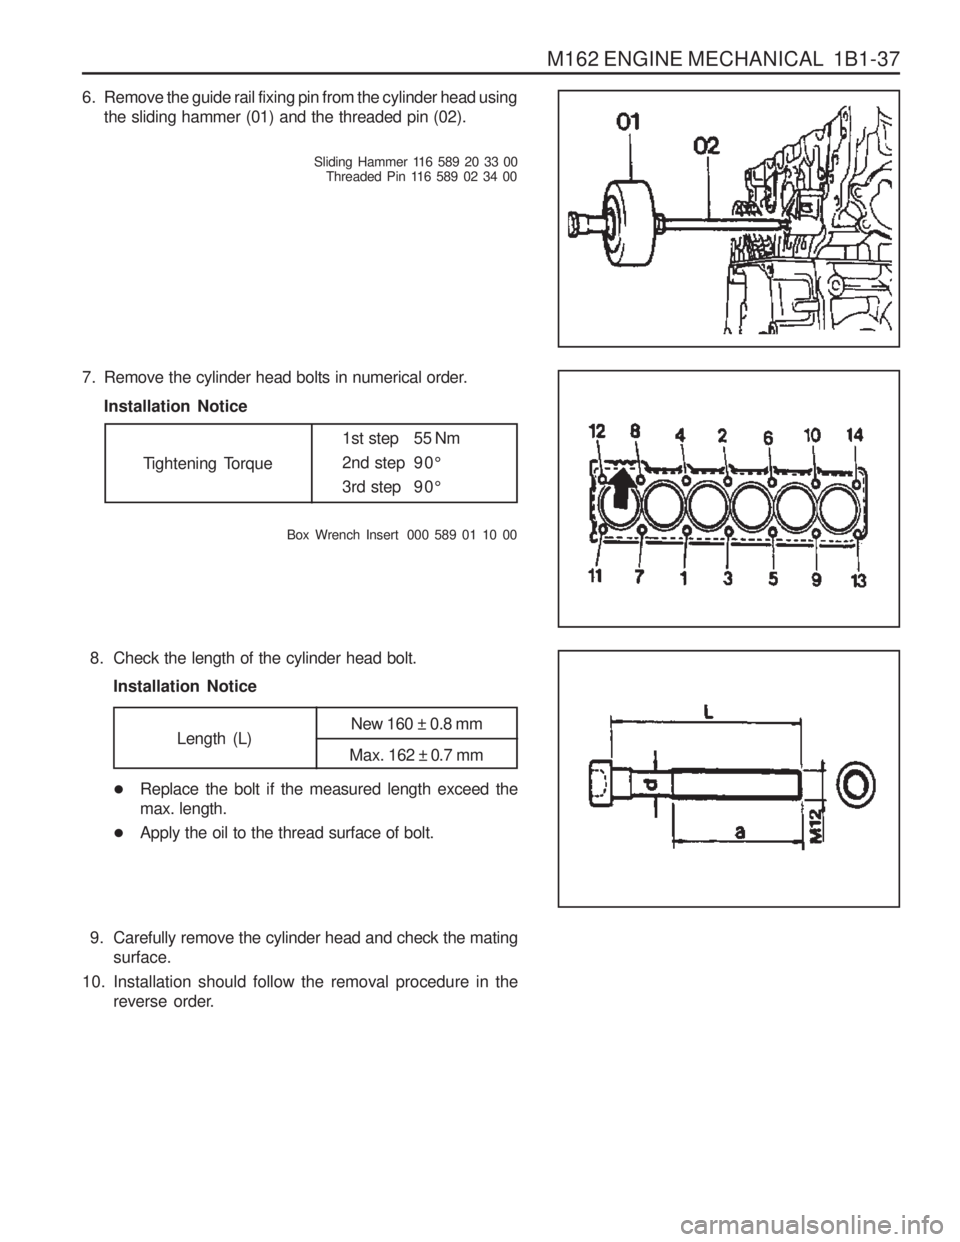 SSANGYONG MUSSO 2003  Service Manual M162 ENGINE MECHANICAL  1B1-37
7. Remove the cylinder head bolts in numerical order.Installation Notice
8. Check the length of the cylinder head bolt. Installation Notice Box  Wrench  Insert   000  58